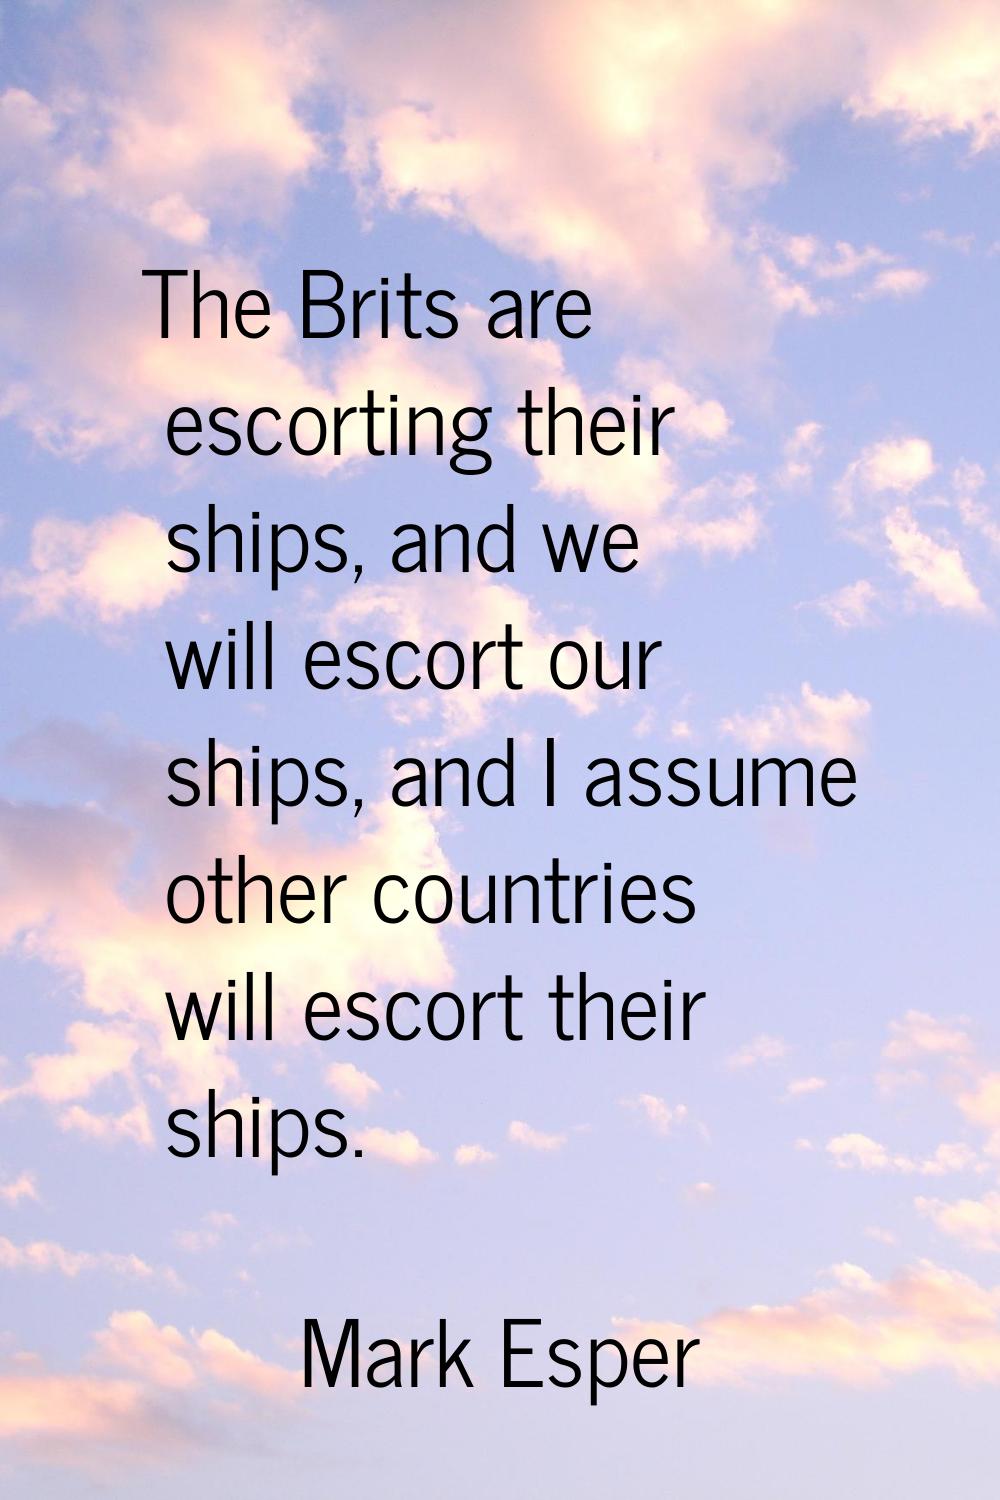 The Brits are escorting their ships, and we will escort our ships, and I assume other countries wil